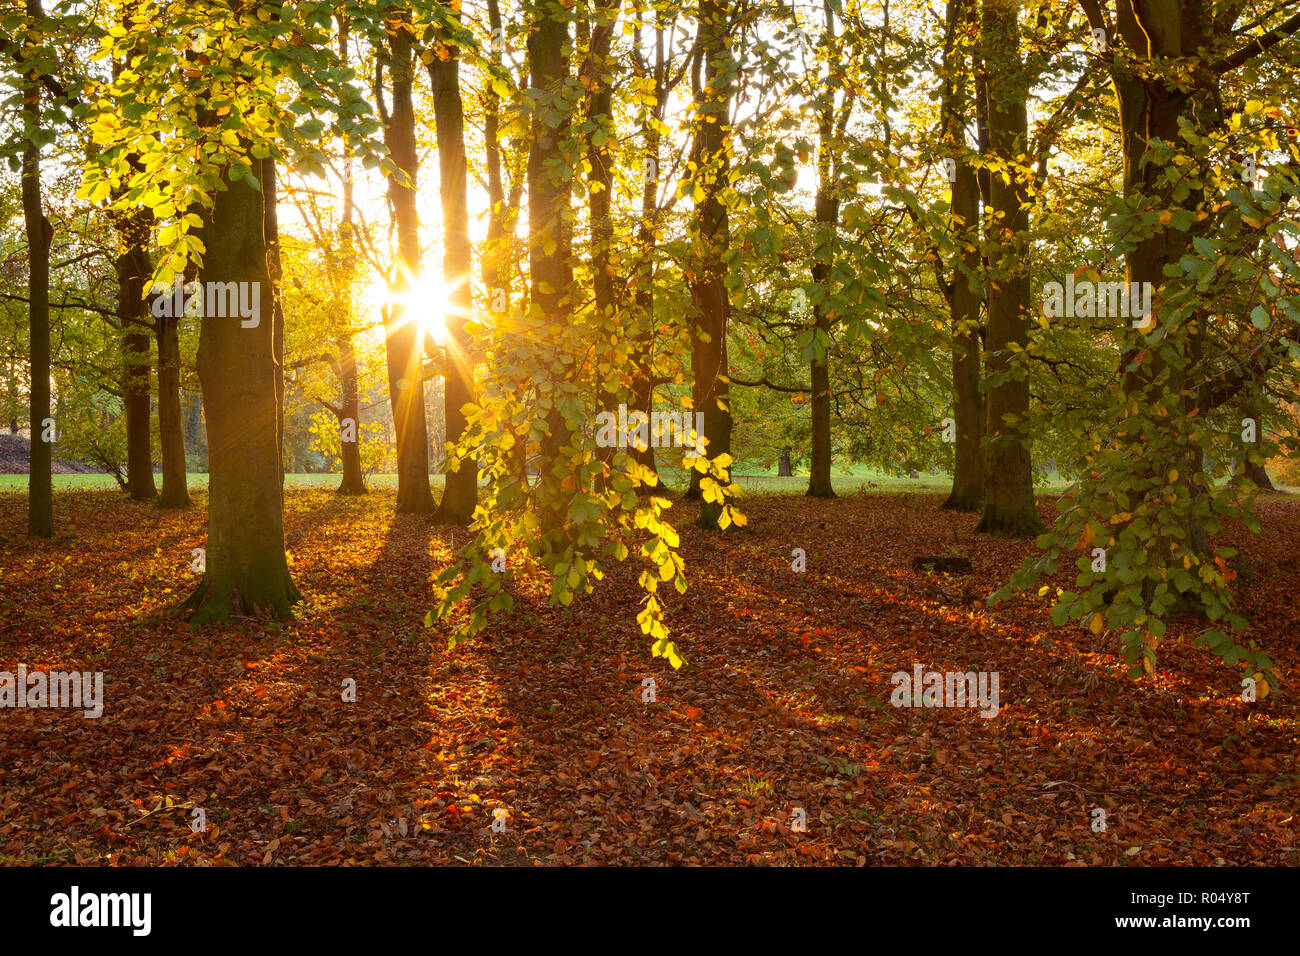 Barton-upon-Humber, North Lincolnshire, UK. 1st November 2018. UK Weather: Late evening light through the Beech Trees in Baysgarth Park in Autumn. Barton-upon-Humber, North Lincolnshire, UK. 1st Novermber 2018. Credit: LEE BEEL/Alamy Live News Stock Photo